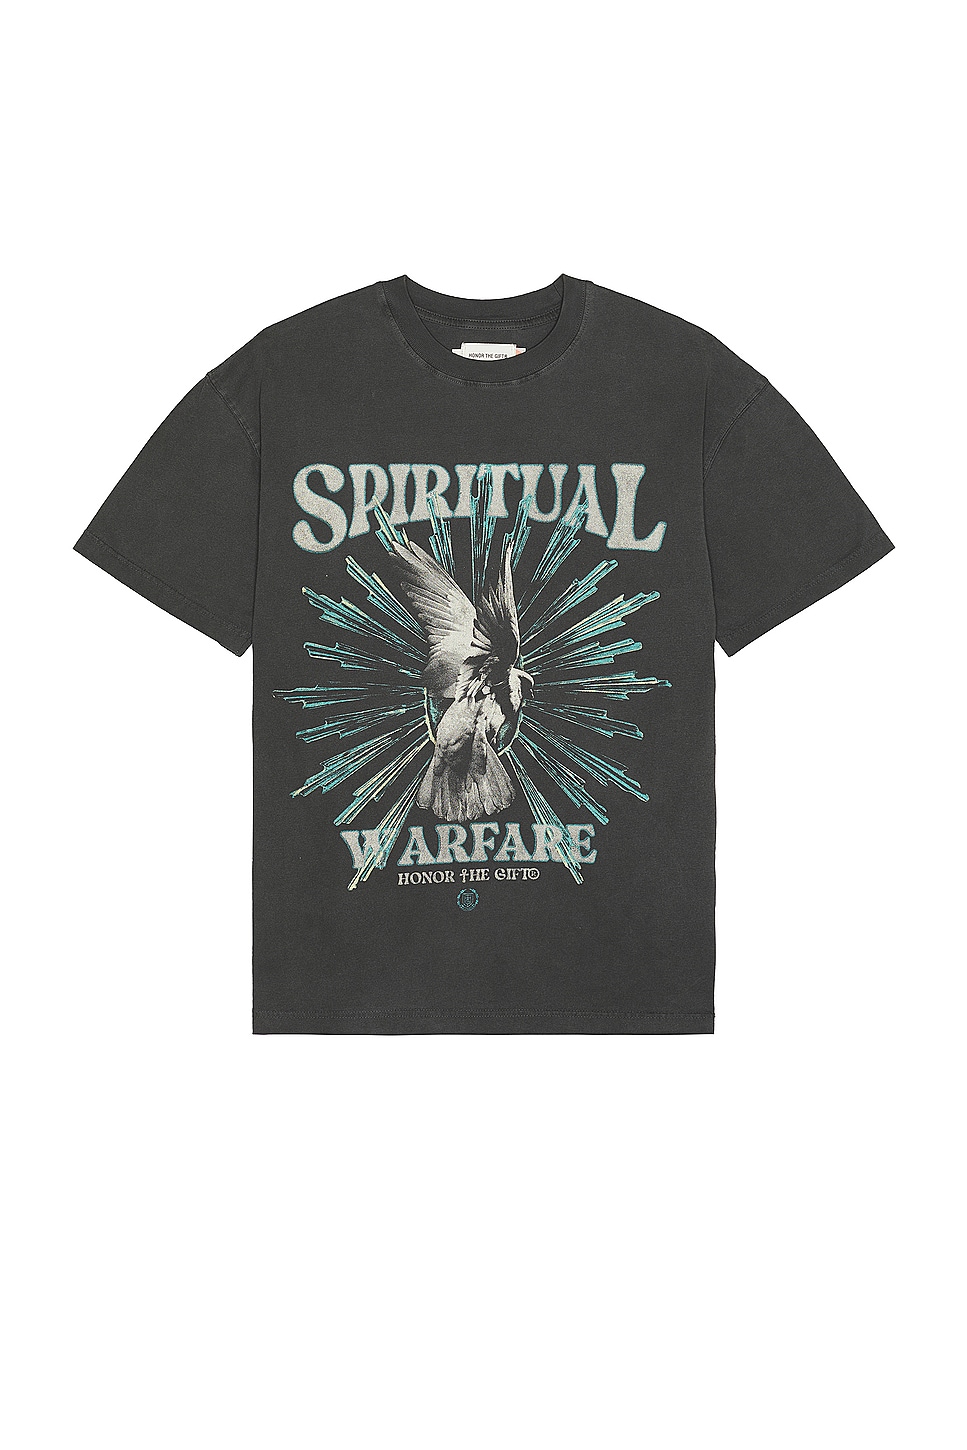 Image 1 of Honor The Gift A-spring Spiritual Conflict Tee in Black